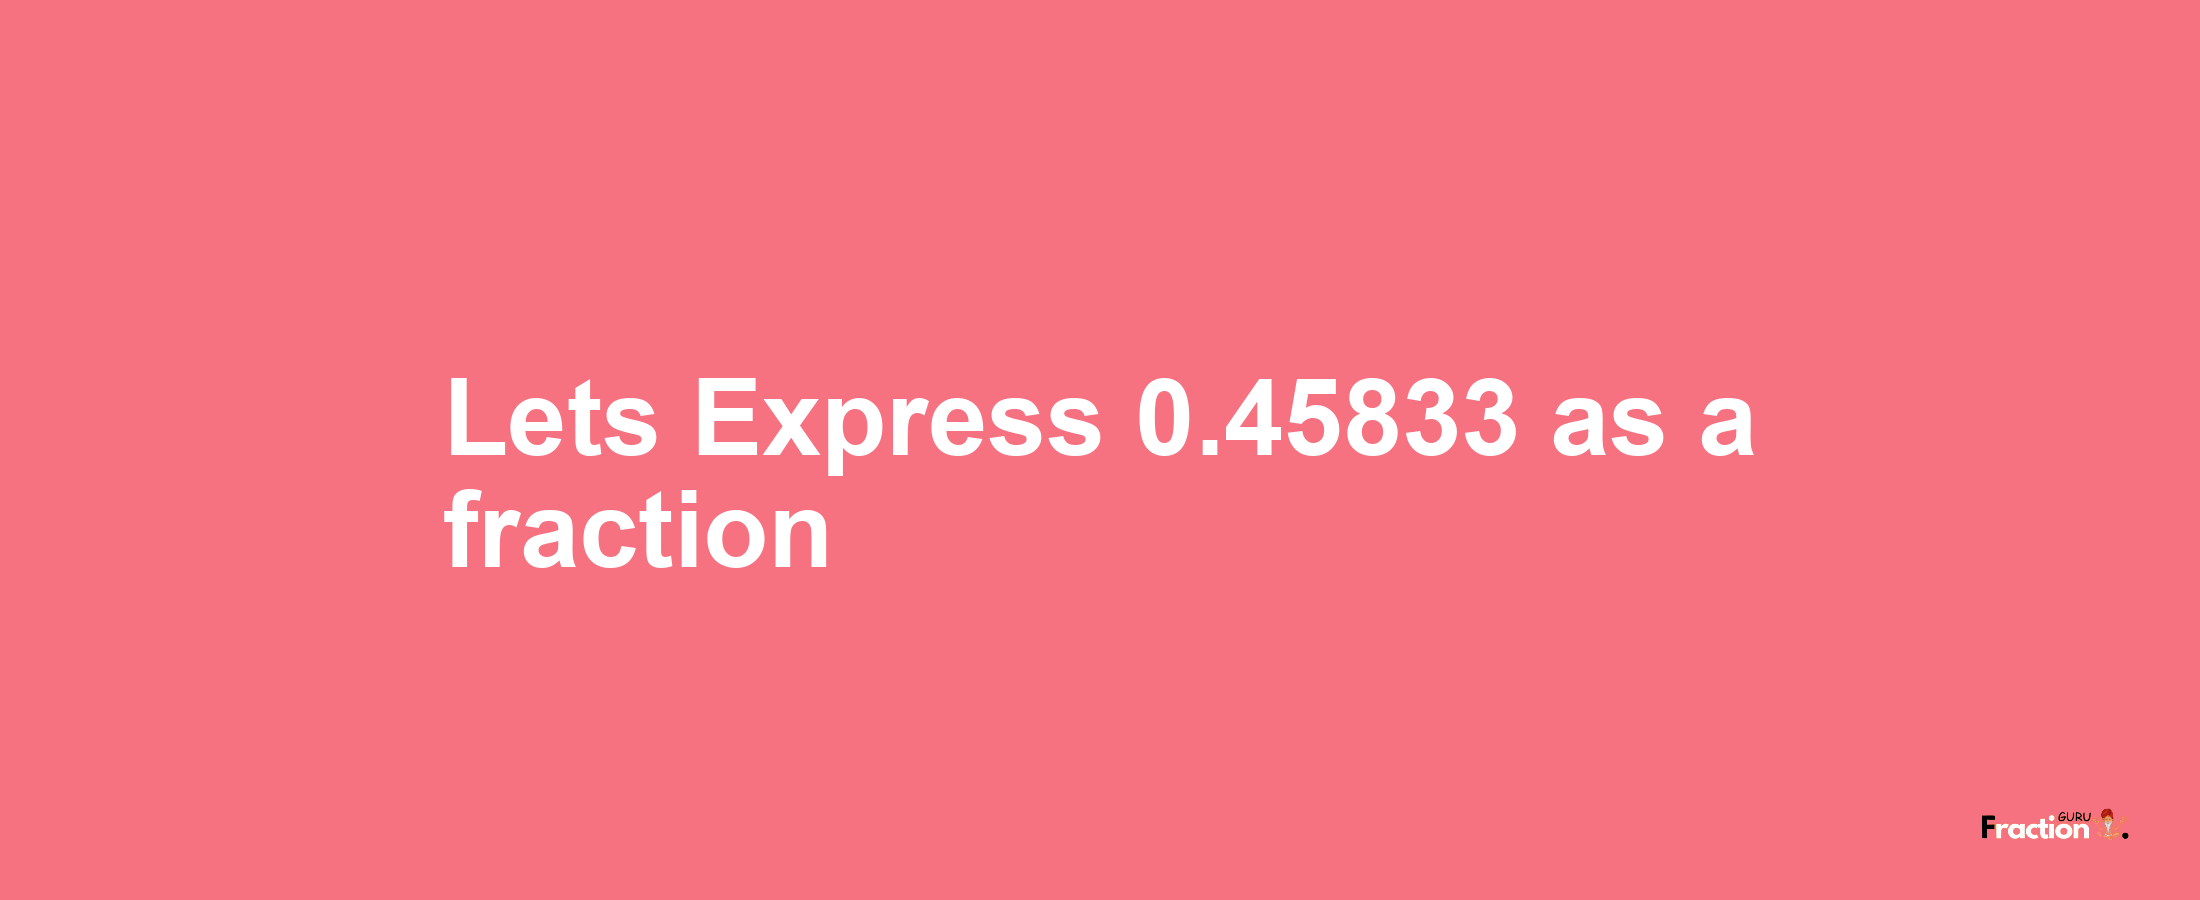 Lets Express 0.45833 as afraction